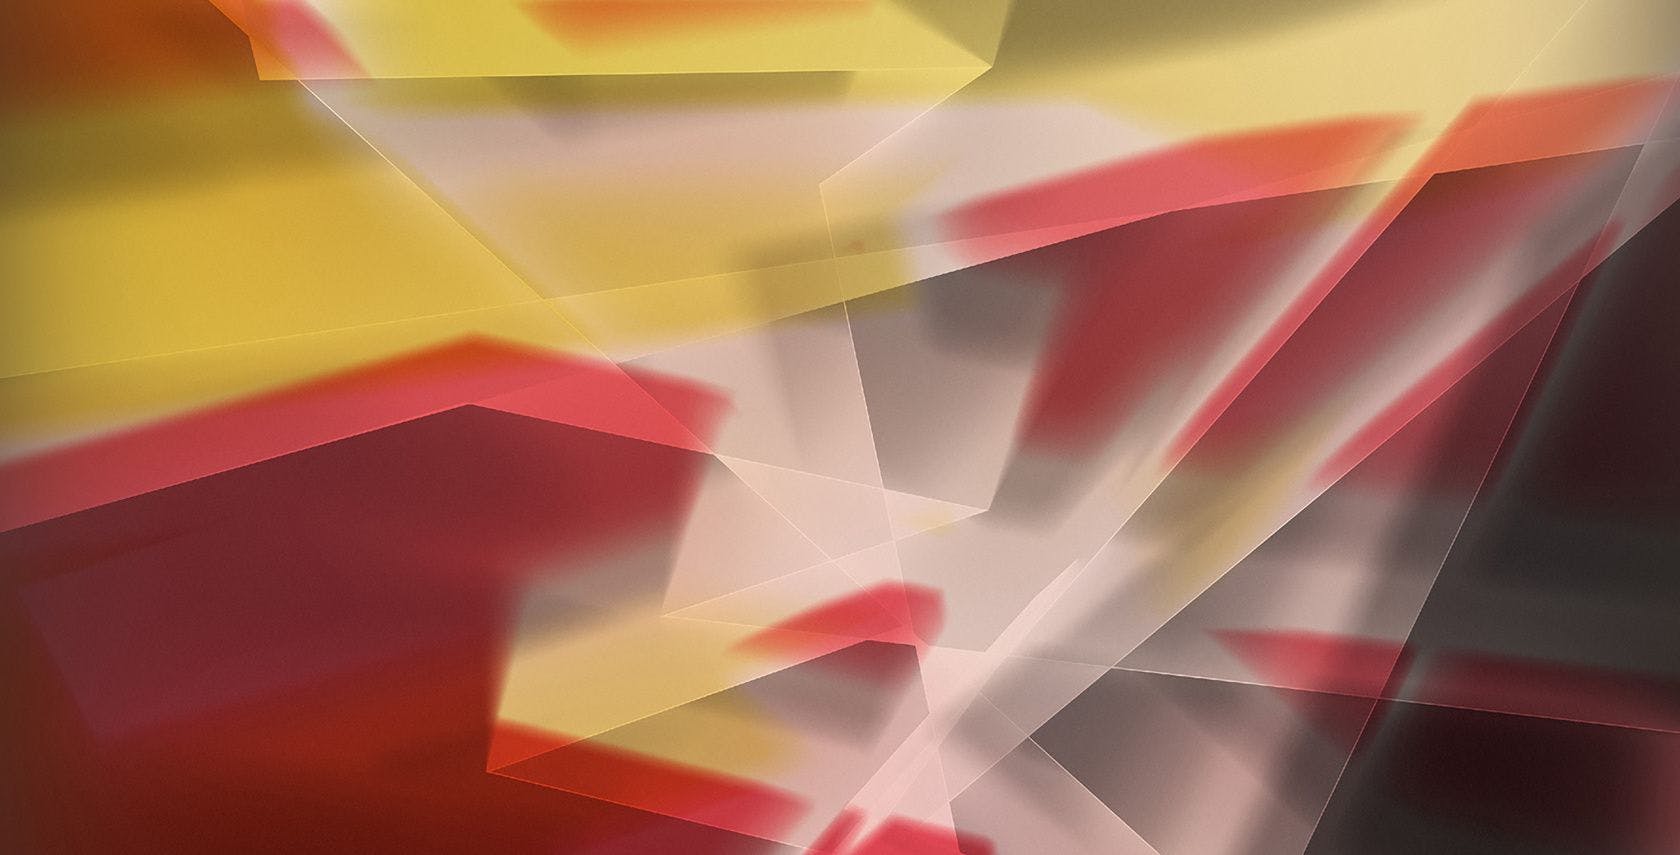 A detail of a photograph by Thomas Ruff, titled phg.02_I, dated 2013.